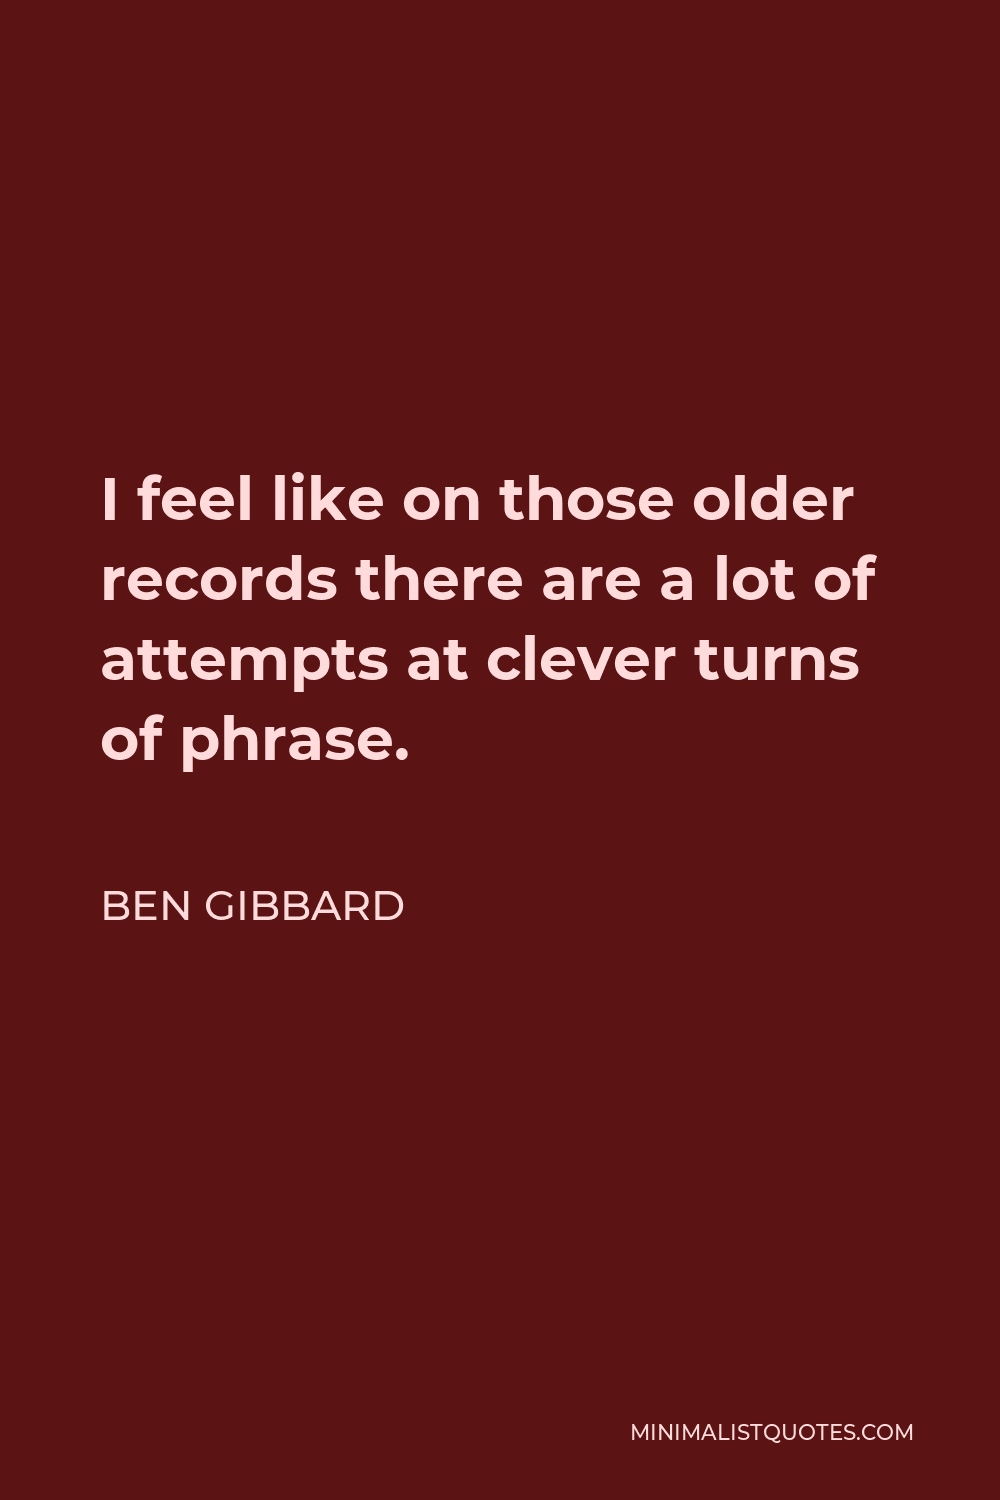 Ben Gibbard Quote - I feel like on those older records there are a lot of attempts at clever turns of phrase.